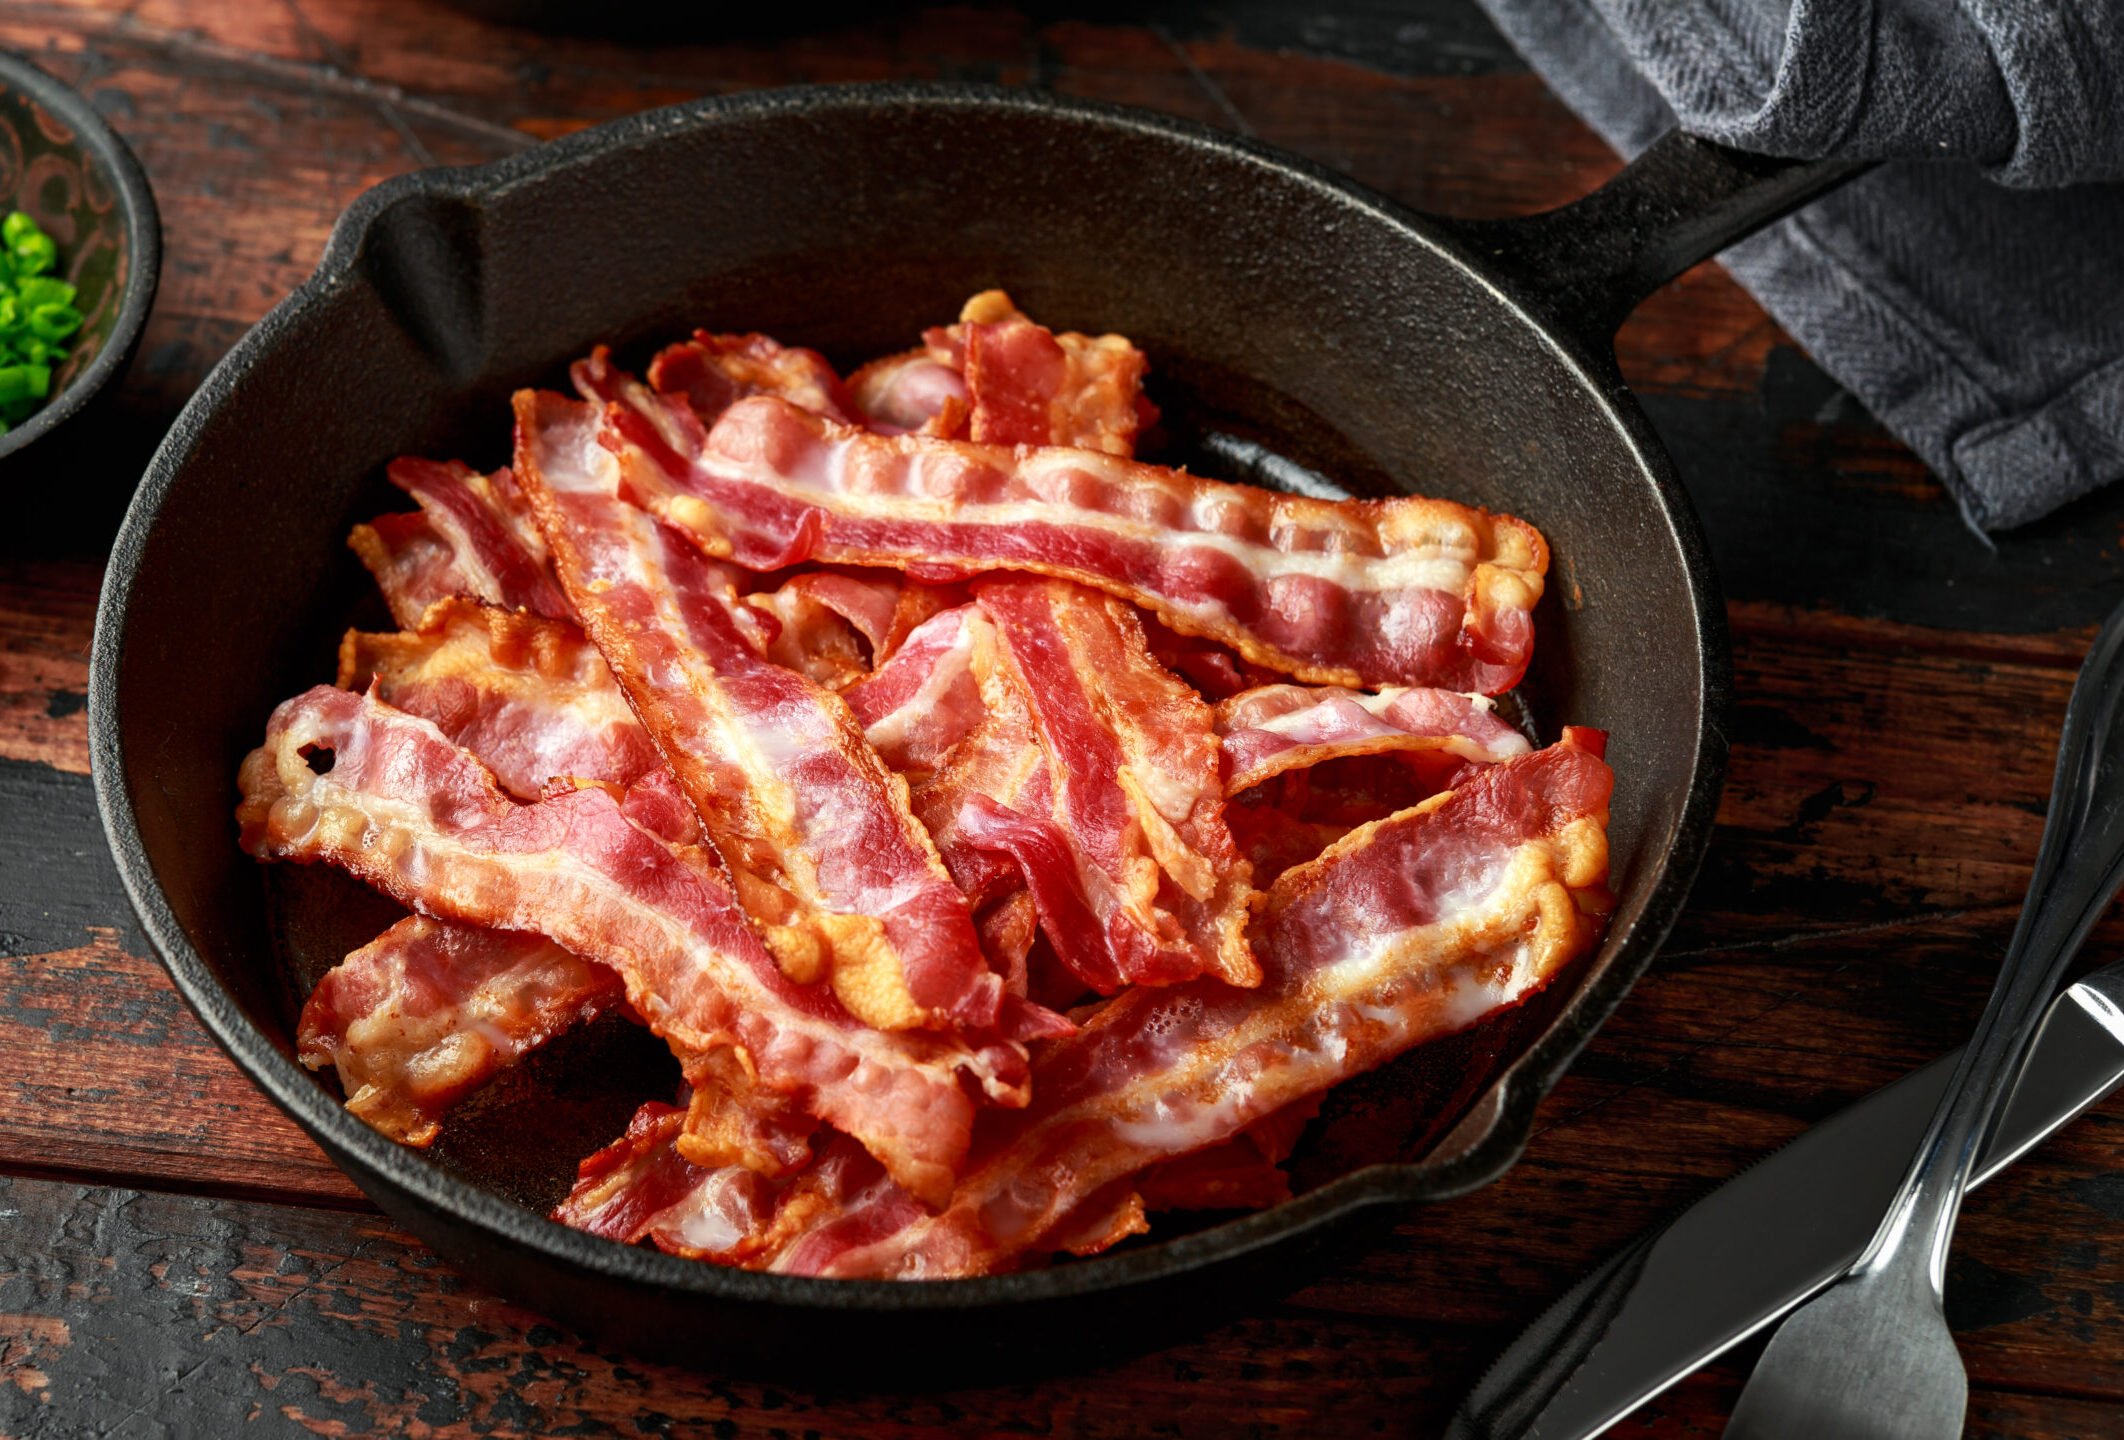 How water can make your bacon crispier